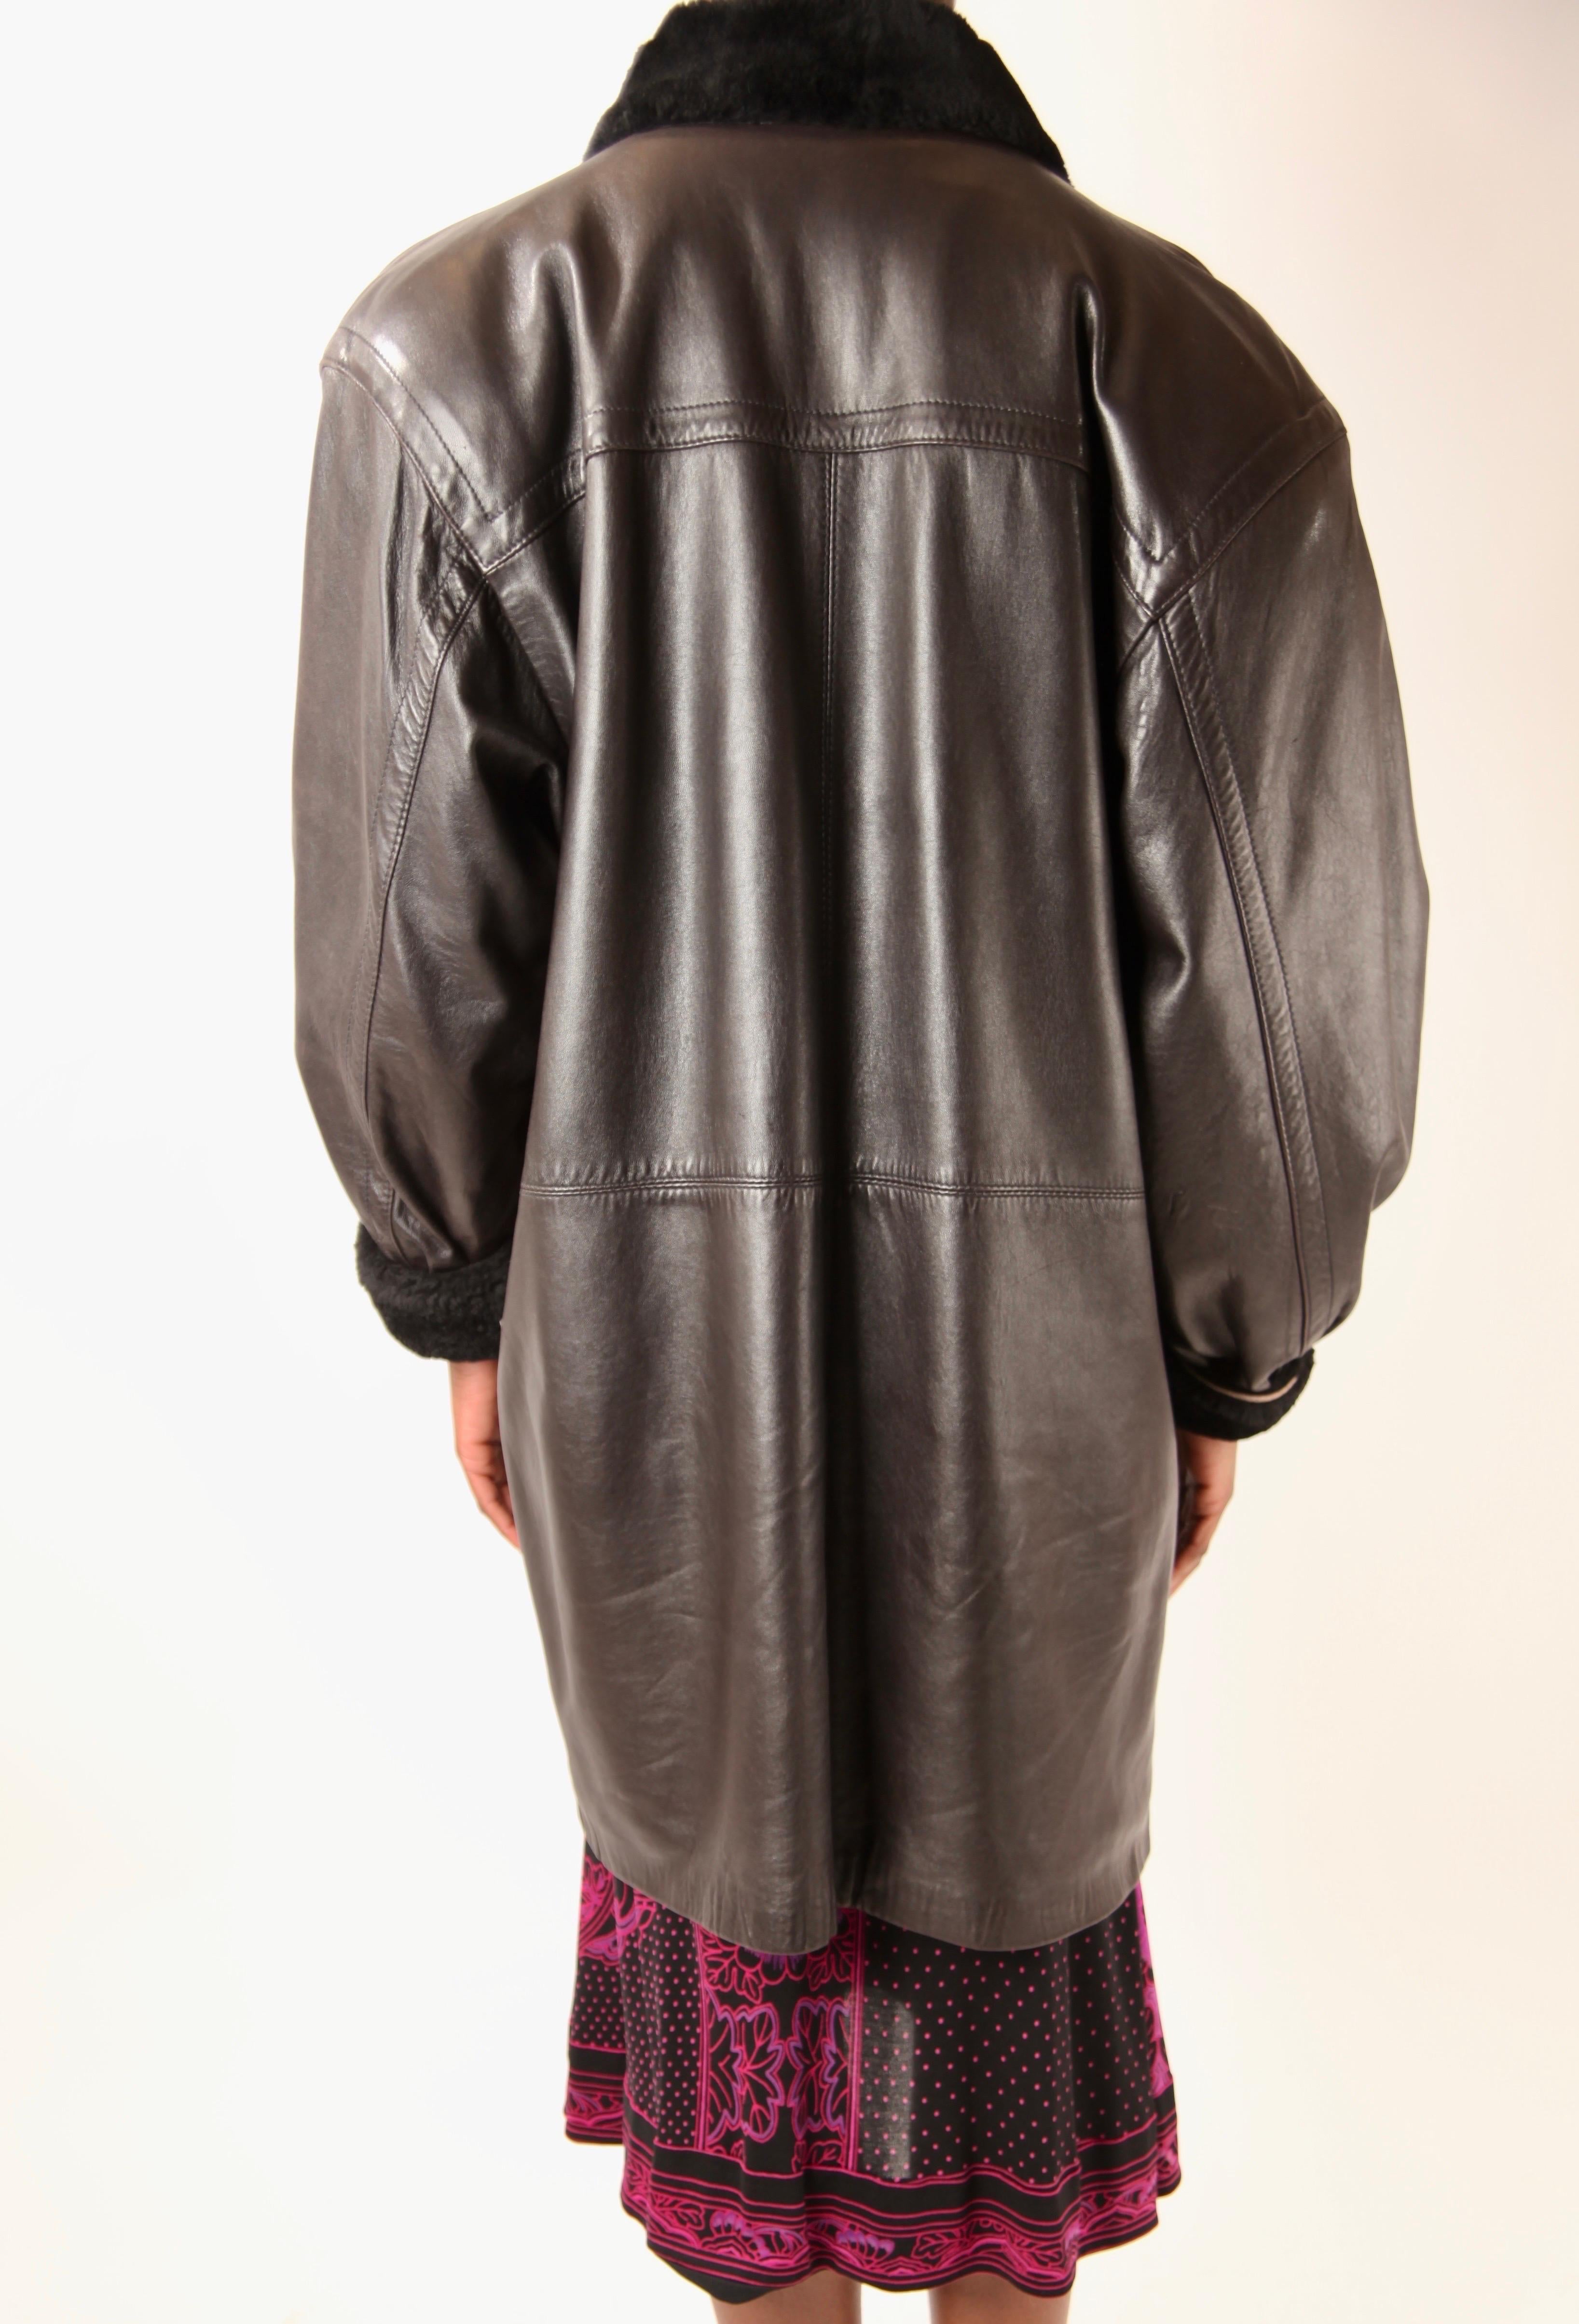 Yves Saint Laurent  oversize silhouette  chocolate shearling coat. C. 1980s For Sale 1